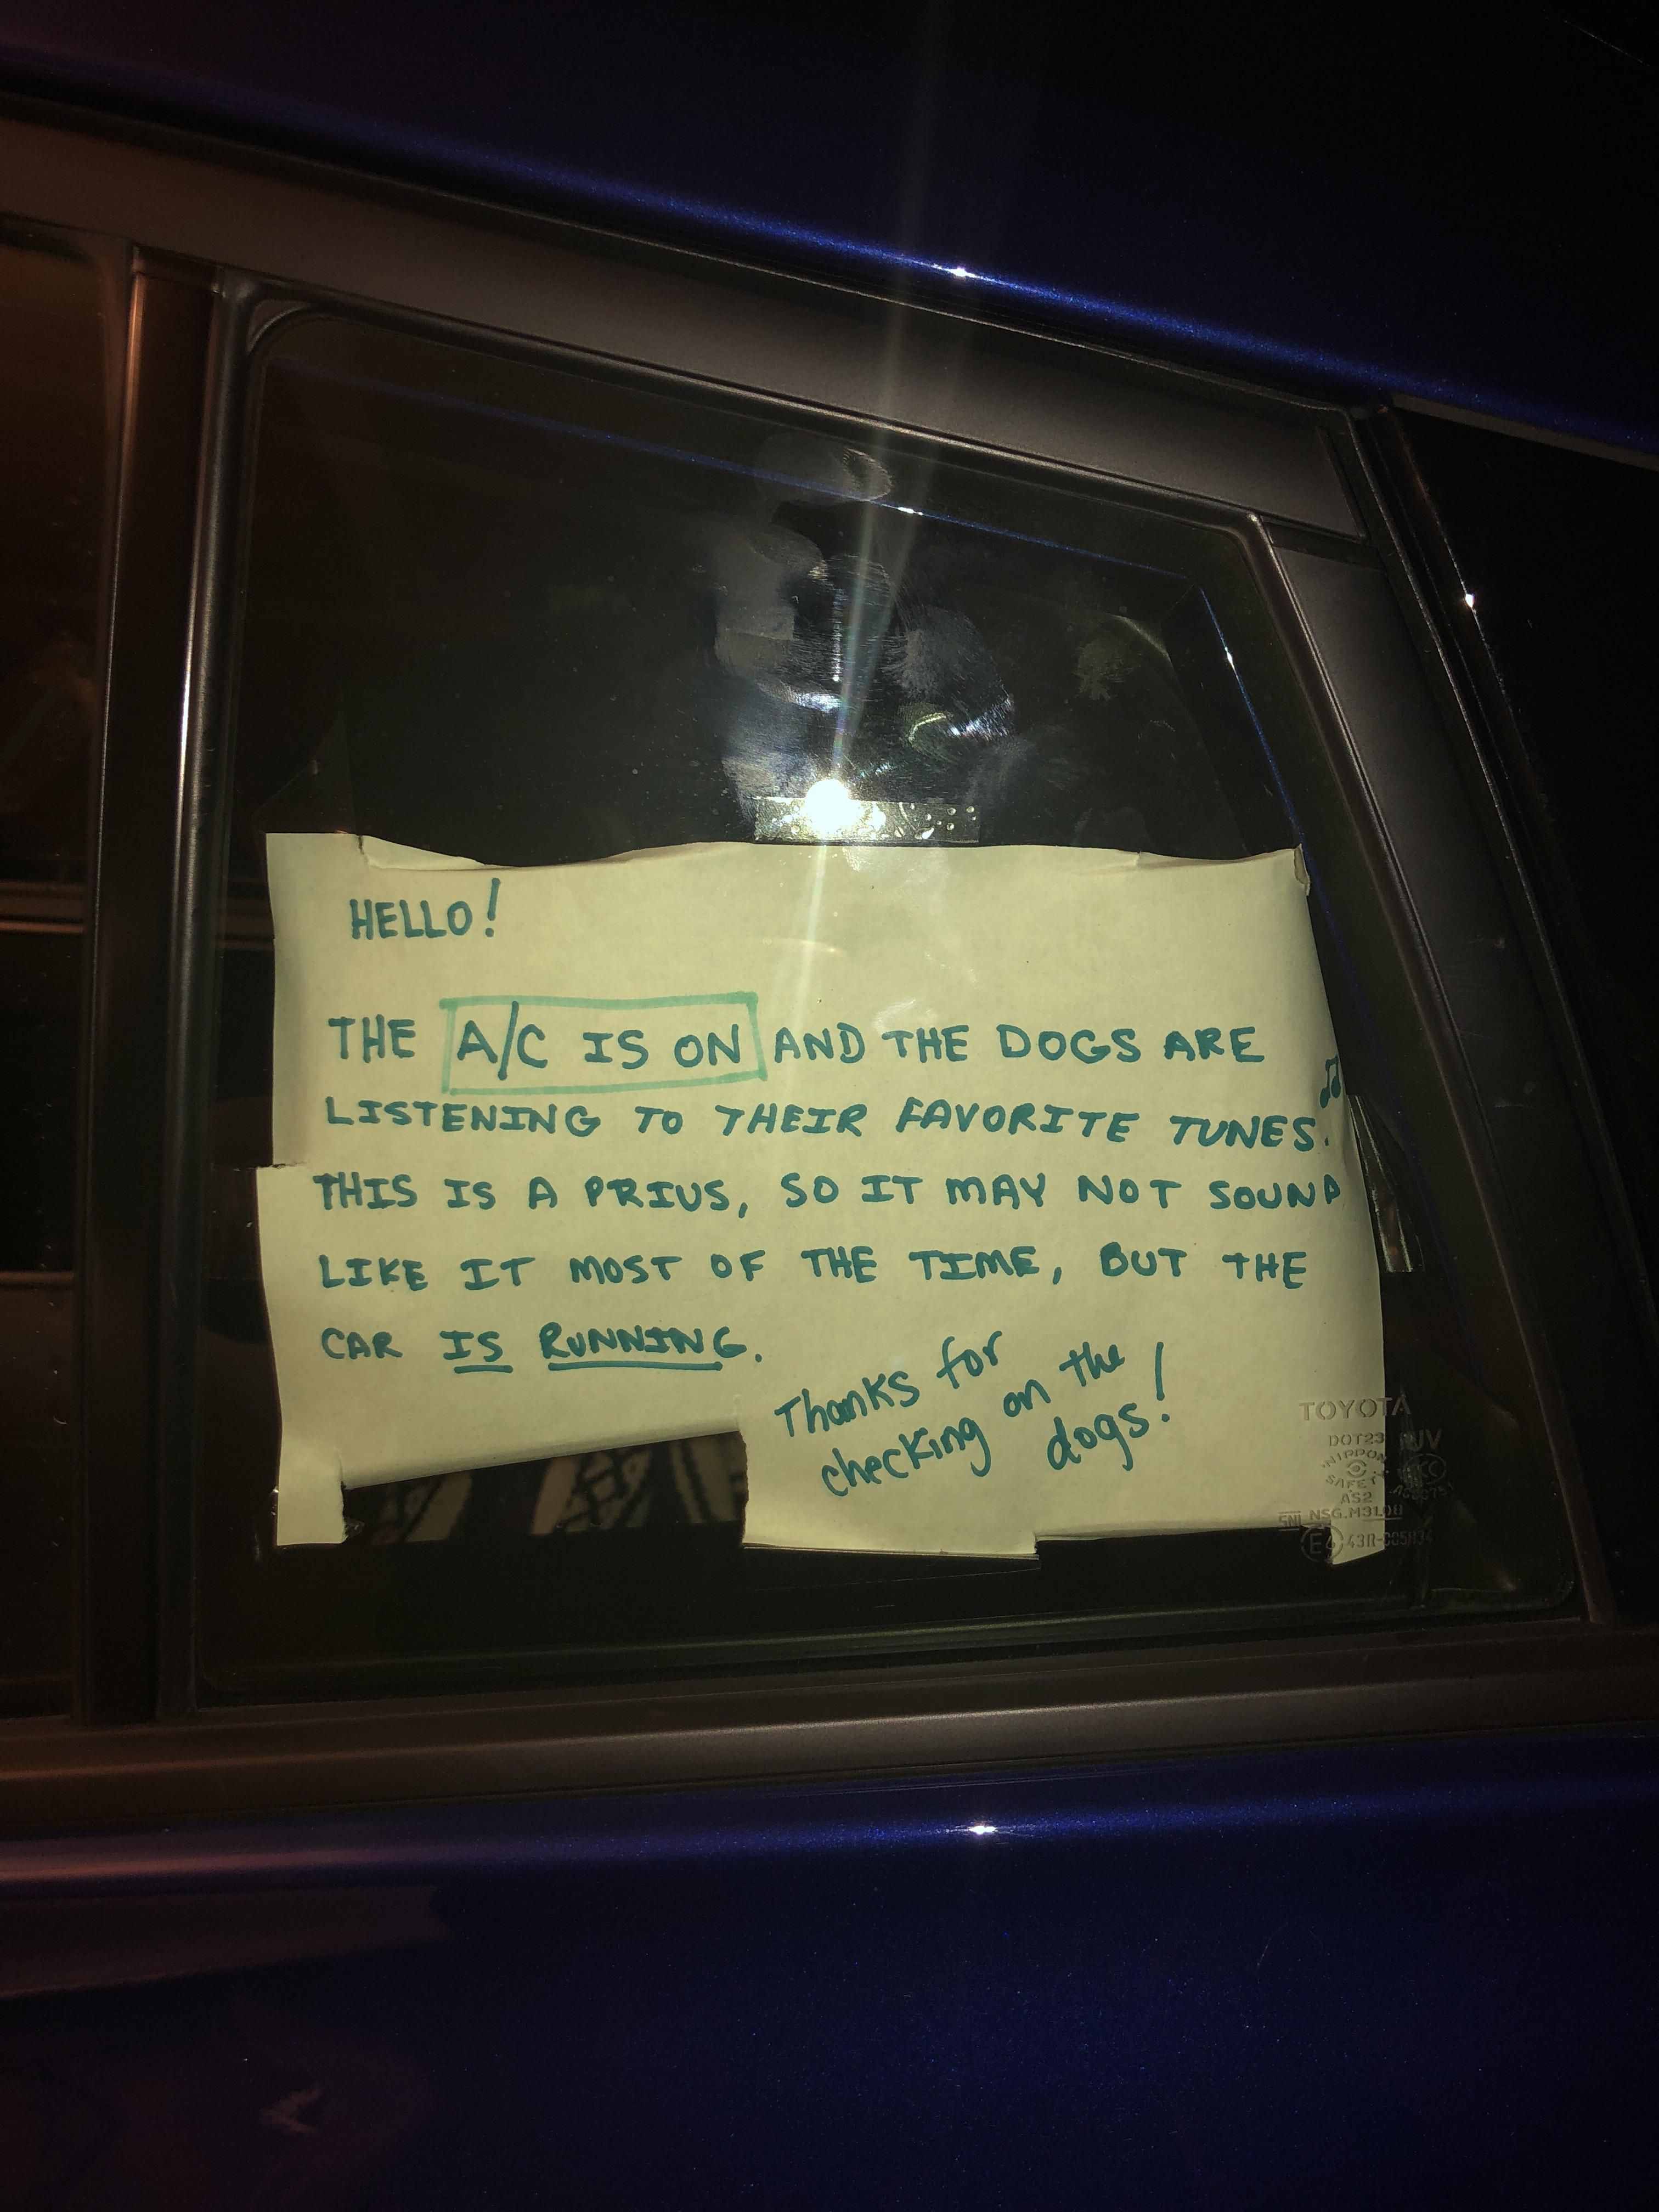 My cousin’s sign on his Prius.